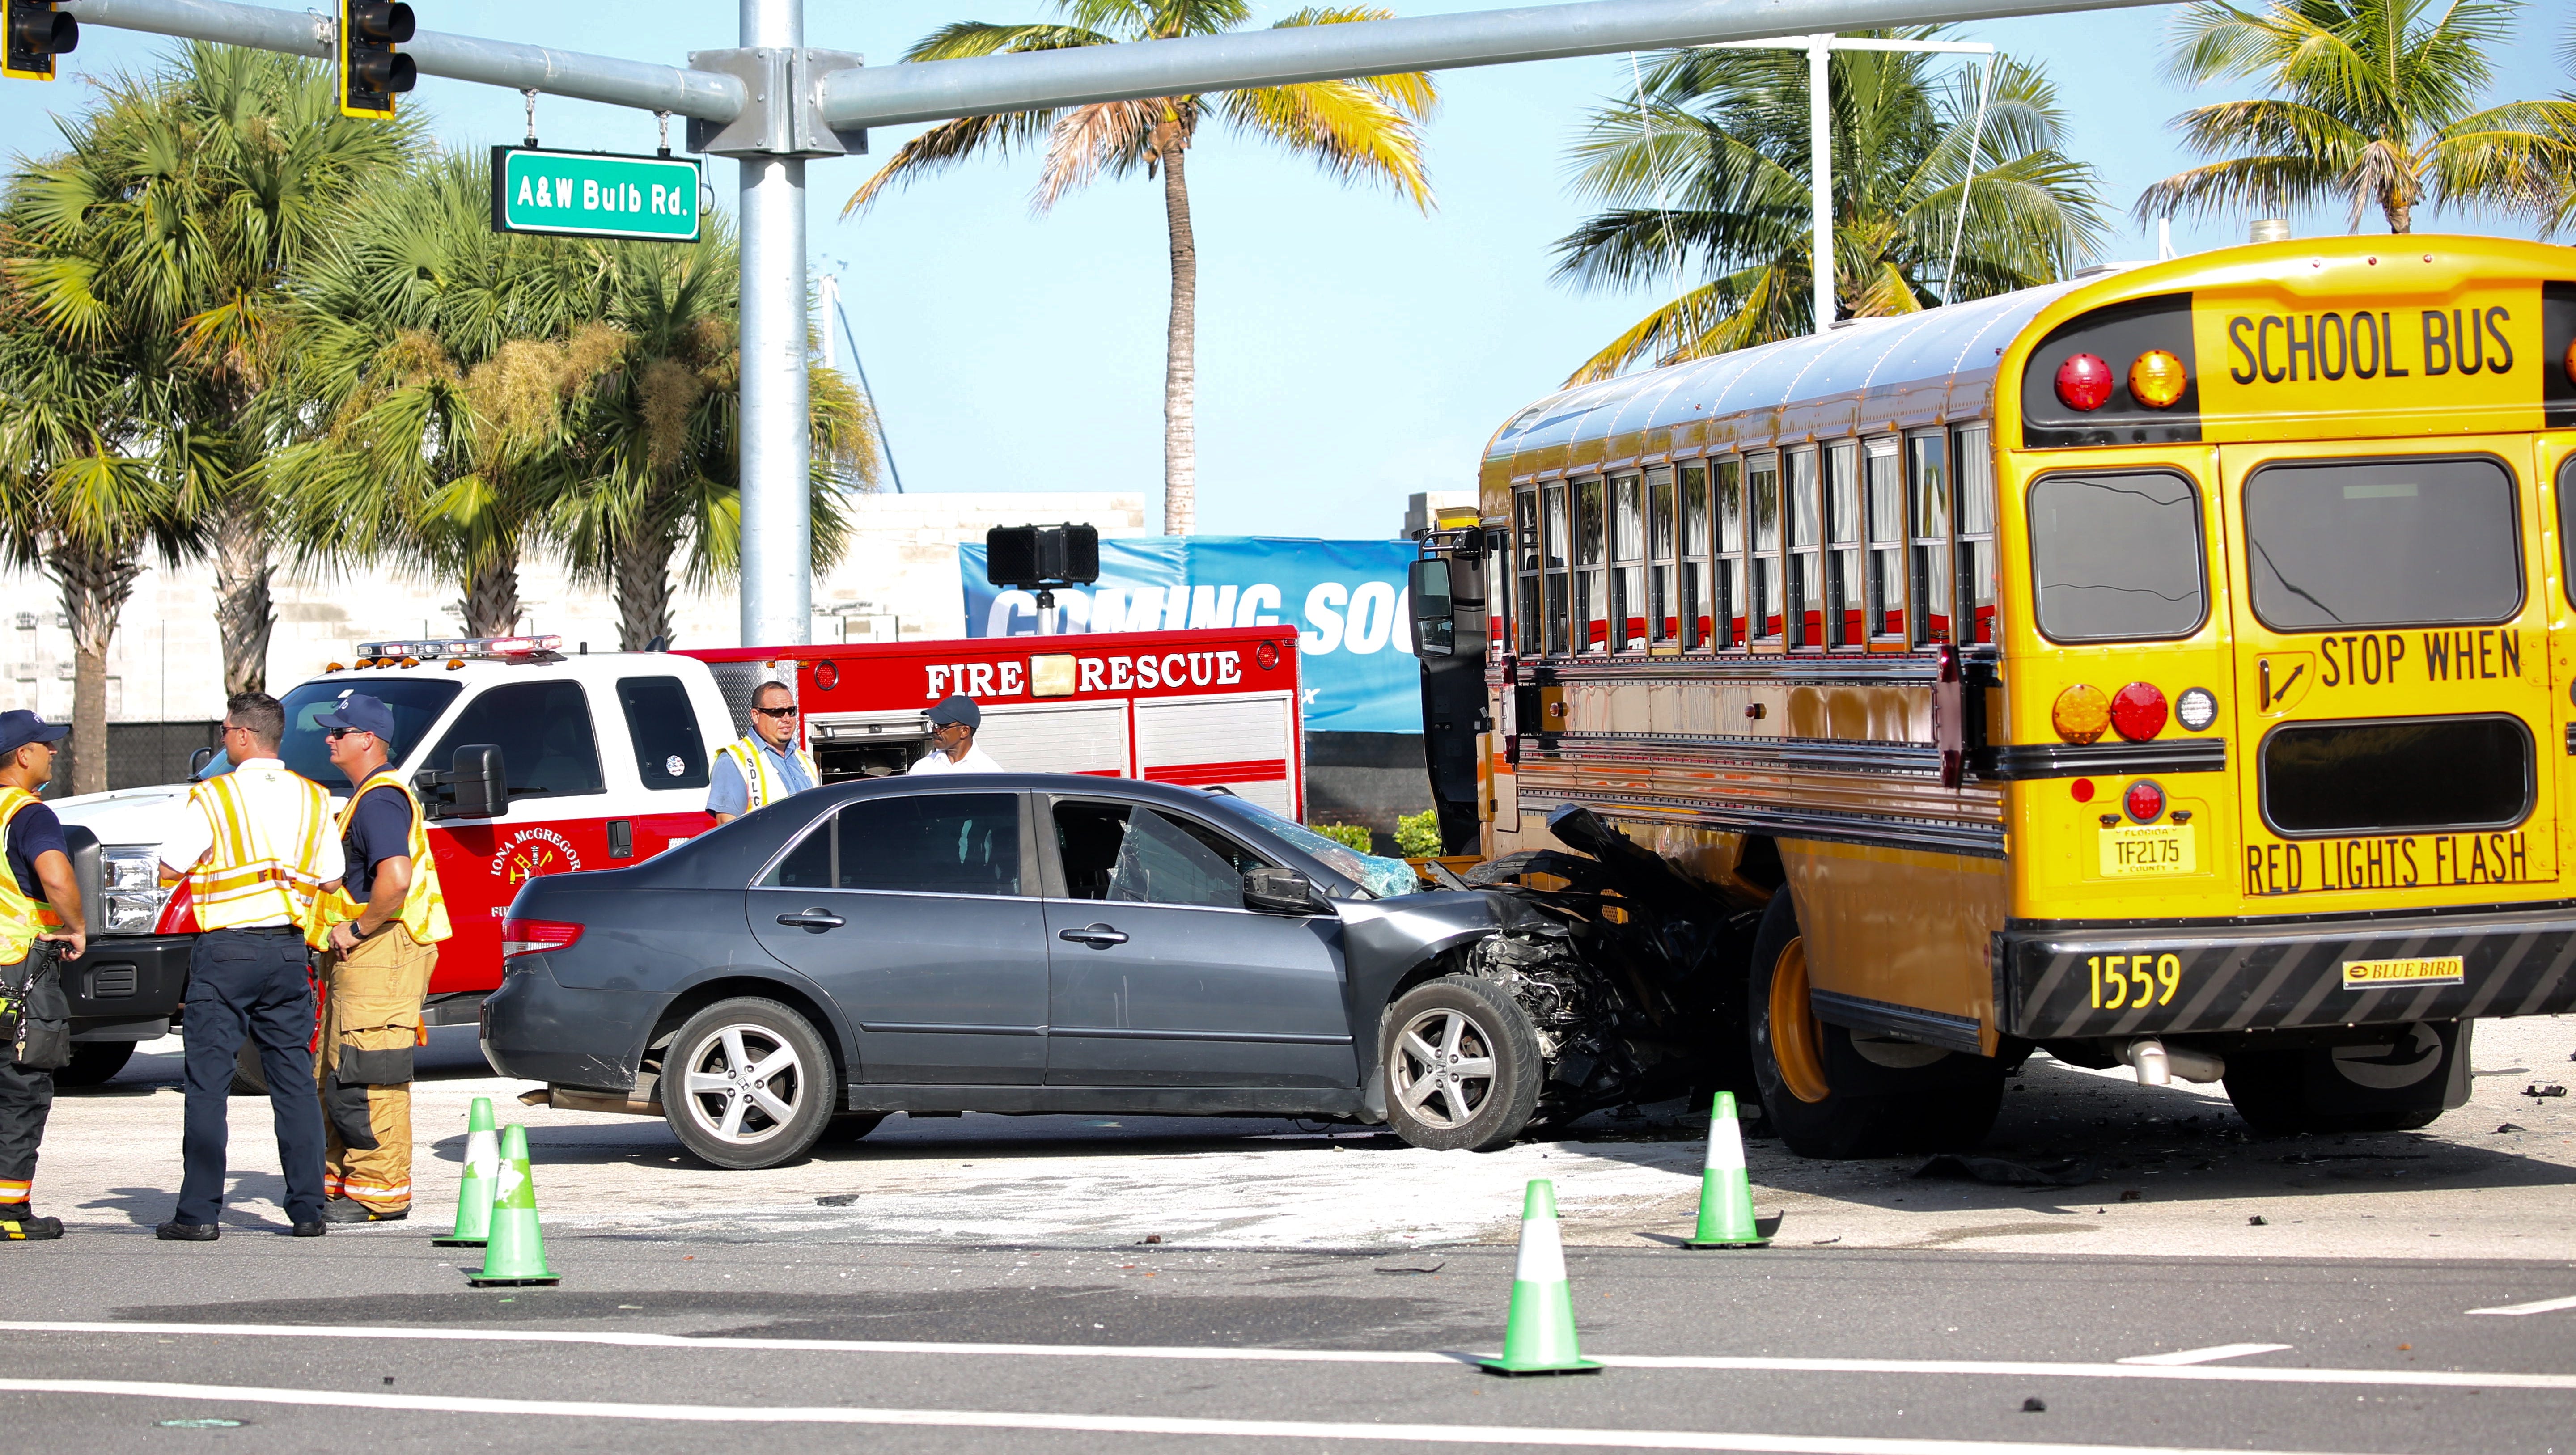 Lee County school bus crashes in south Fort Myers, no children hurt